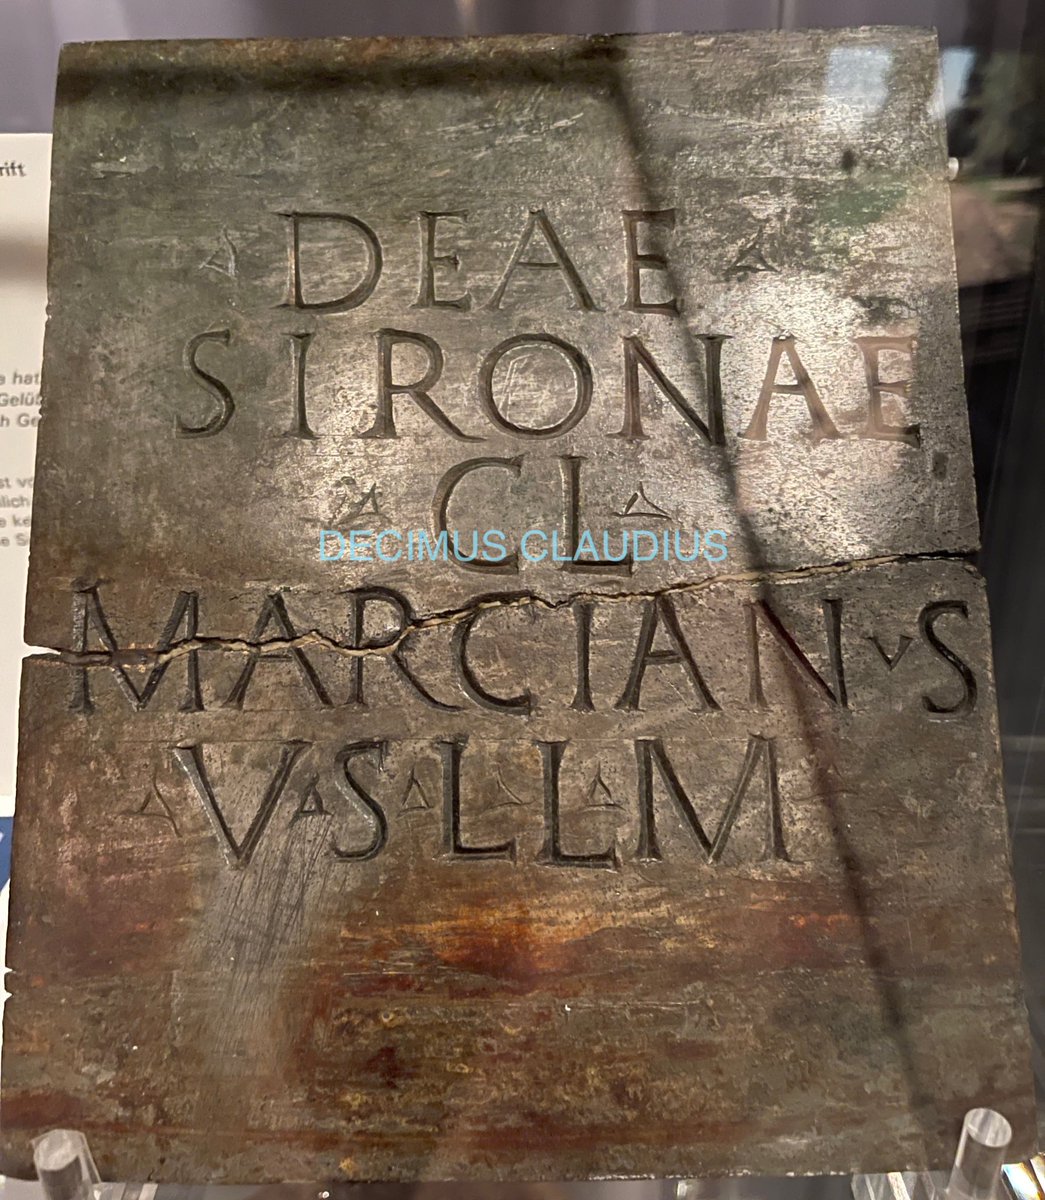 A #Roman bronze #tablet dedicated to the #Celtic healing deity Sirona by Claudius Marcianus, who gladly, willingly, and deservedly fulfilled his vow. Found in Hockenheim and on display in the Badisches Landesmuseum in #Karlsruhe, #Germany.

#epigraphytuesday #archaeology #latin